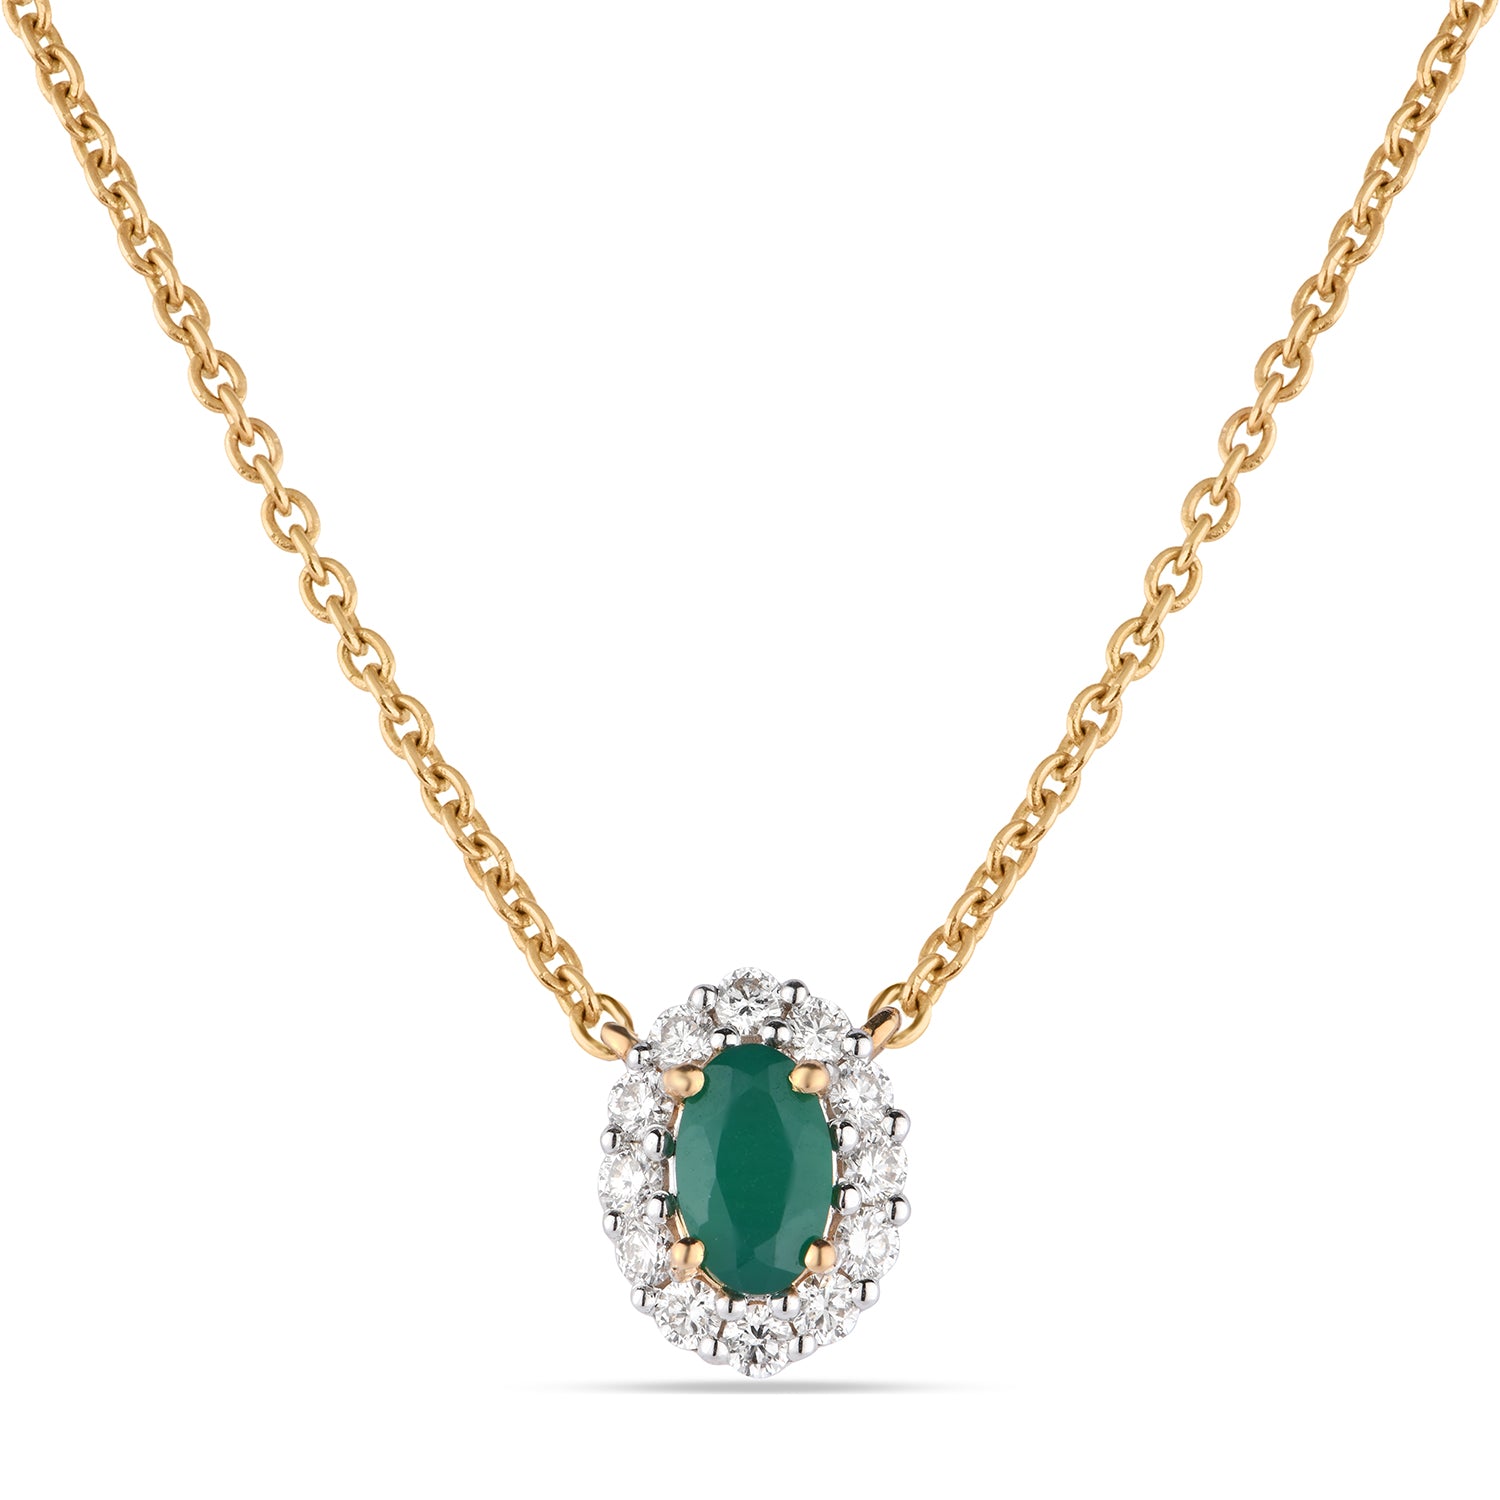 Buy Silver Plated Diamond Necklace Set With Green Stones